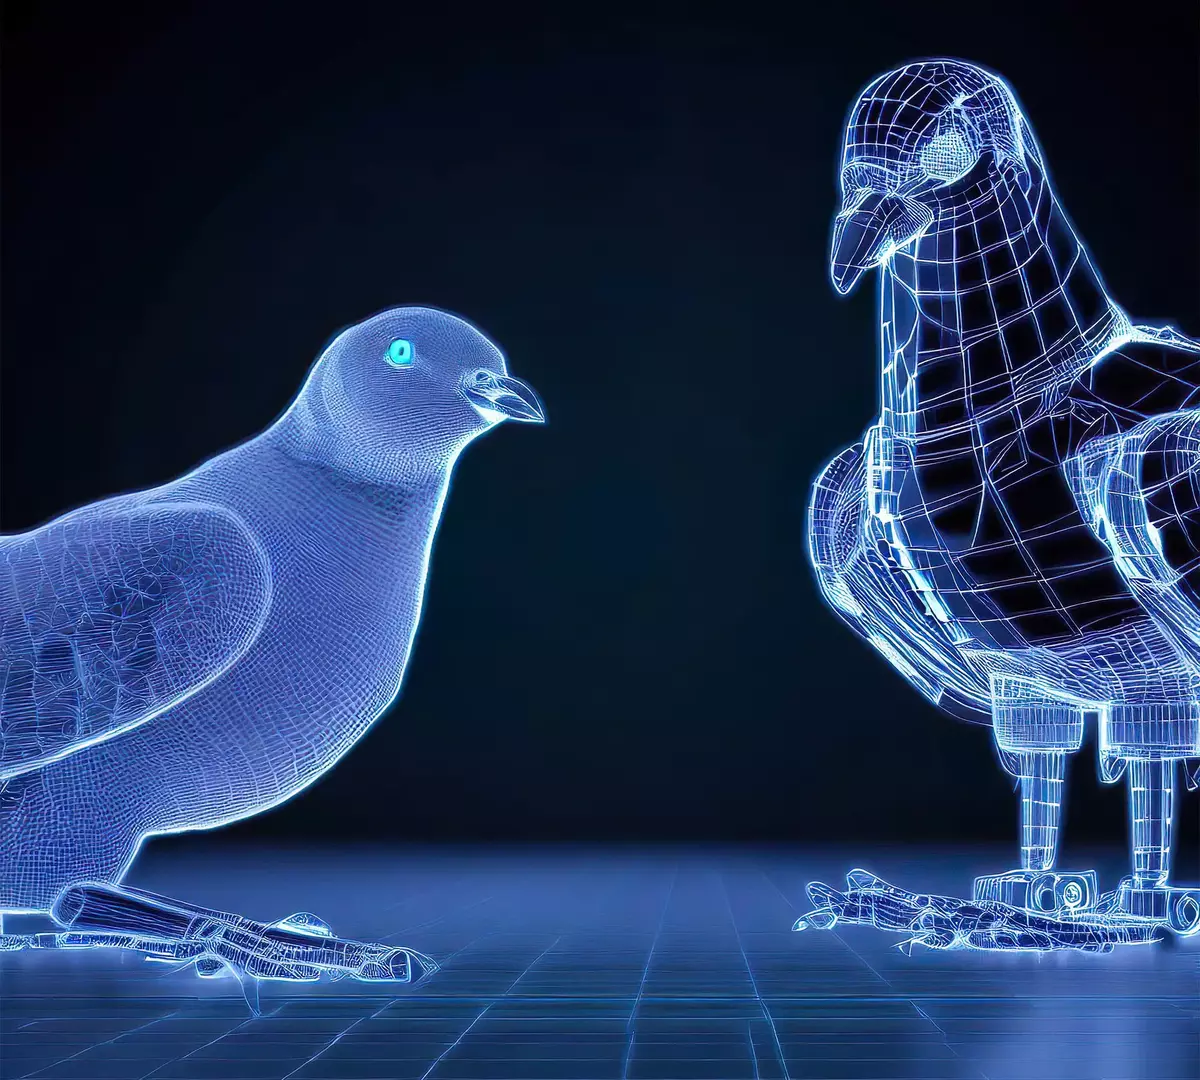 The surprising connection between pigeons and artificial intelligence